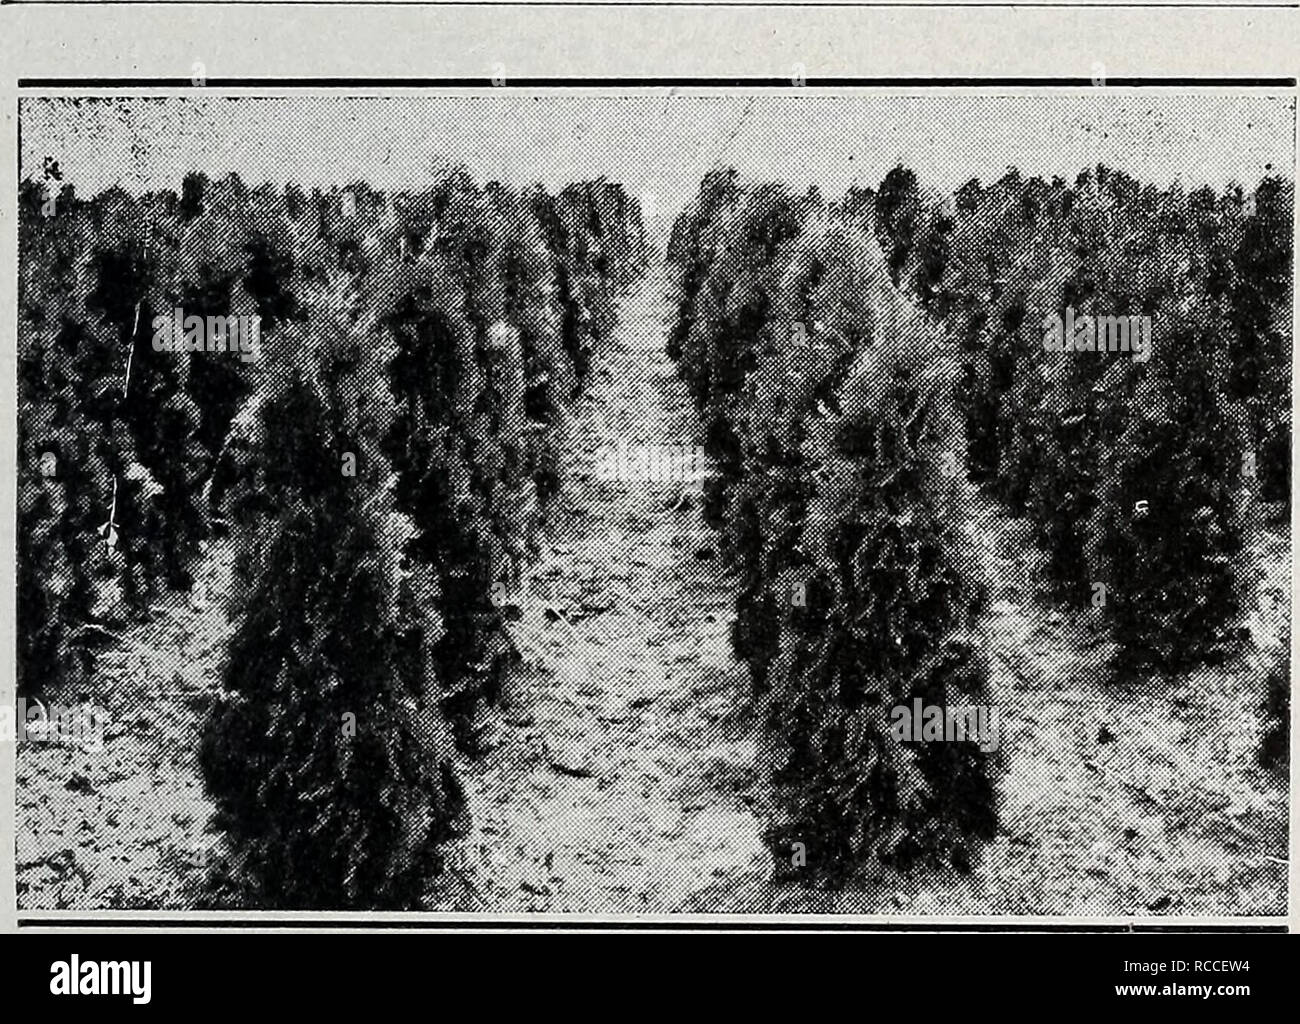 . The dixie planter : ornamentals exclusively fall 1932, - spring, 1933. Nurseries (Horticulture) Catalogs; Nursery stock Catalogs; Shrubs Catalogs; Trees Catalogs; Roses Catalogs; Fruit Catalogs. 9 Coniferous Evergreens (continued) Thuja occidentalis filicoides. Fern-like Pyramidal Arborvitae. Medium grower; beautiful fern- like foliage. 1^ to 2 It 1.50 2 to 2^ ft 2.00 2% to 3 ft 2.50 3 to 3% ft 3.00 31^ to 4 ft 4.00 4 to 4.V2 it 5.00 41^ to 5 ft 5.50 Thuja occidentalis globosa. Globe American Ar- borvitae. Compact, dwarf grower. Bronze winter color. Perfect globe in shape. 11/2 to 2 ft. spre Stock Photo